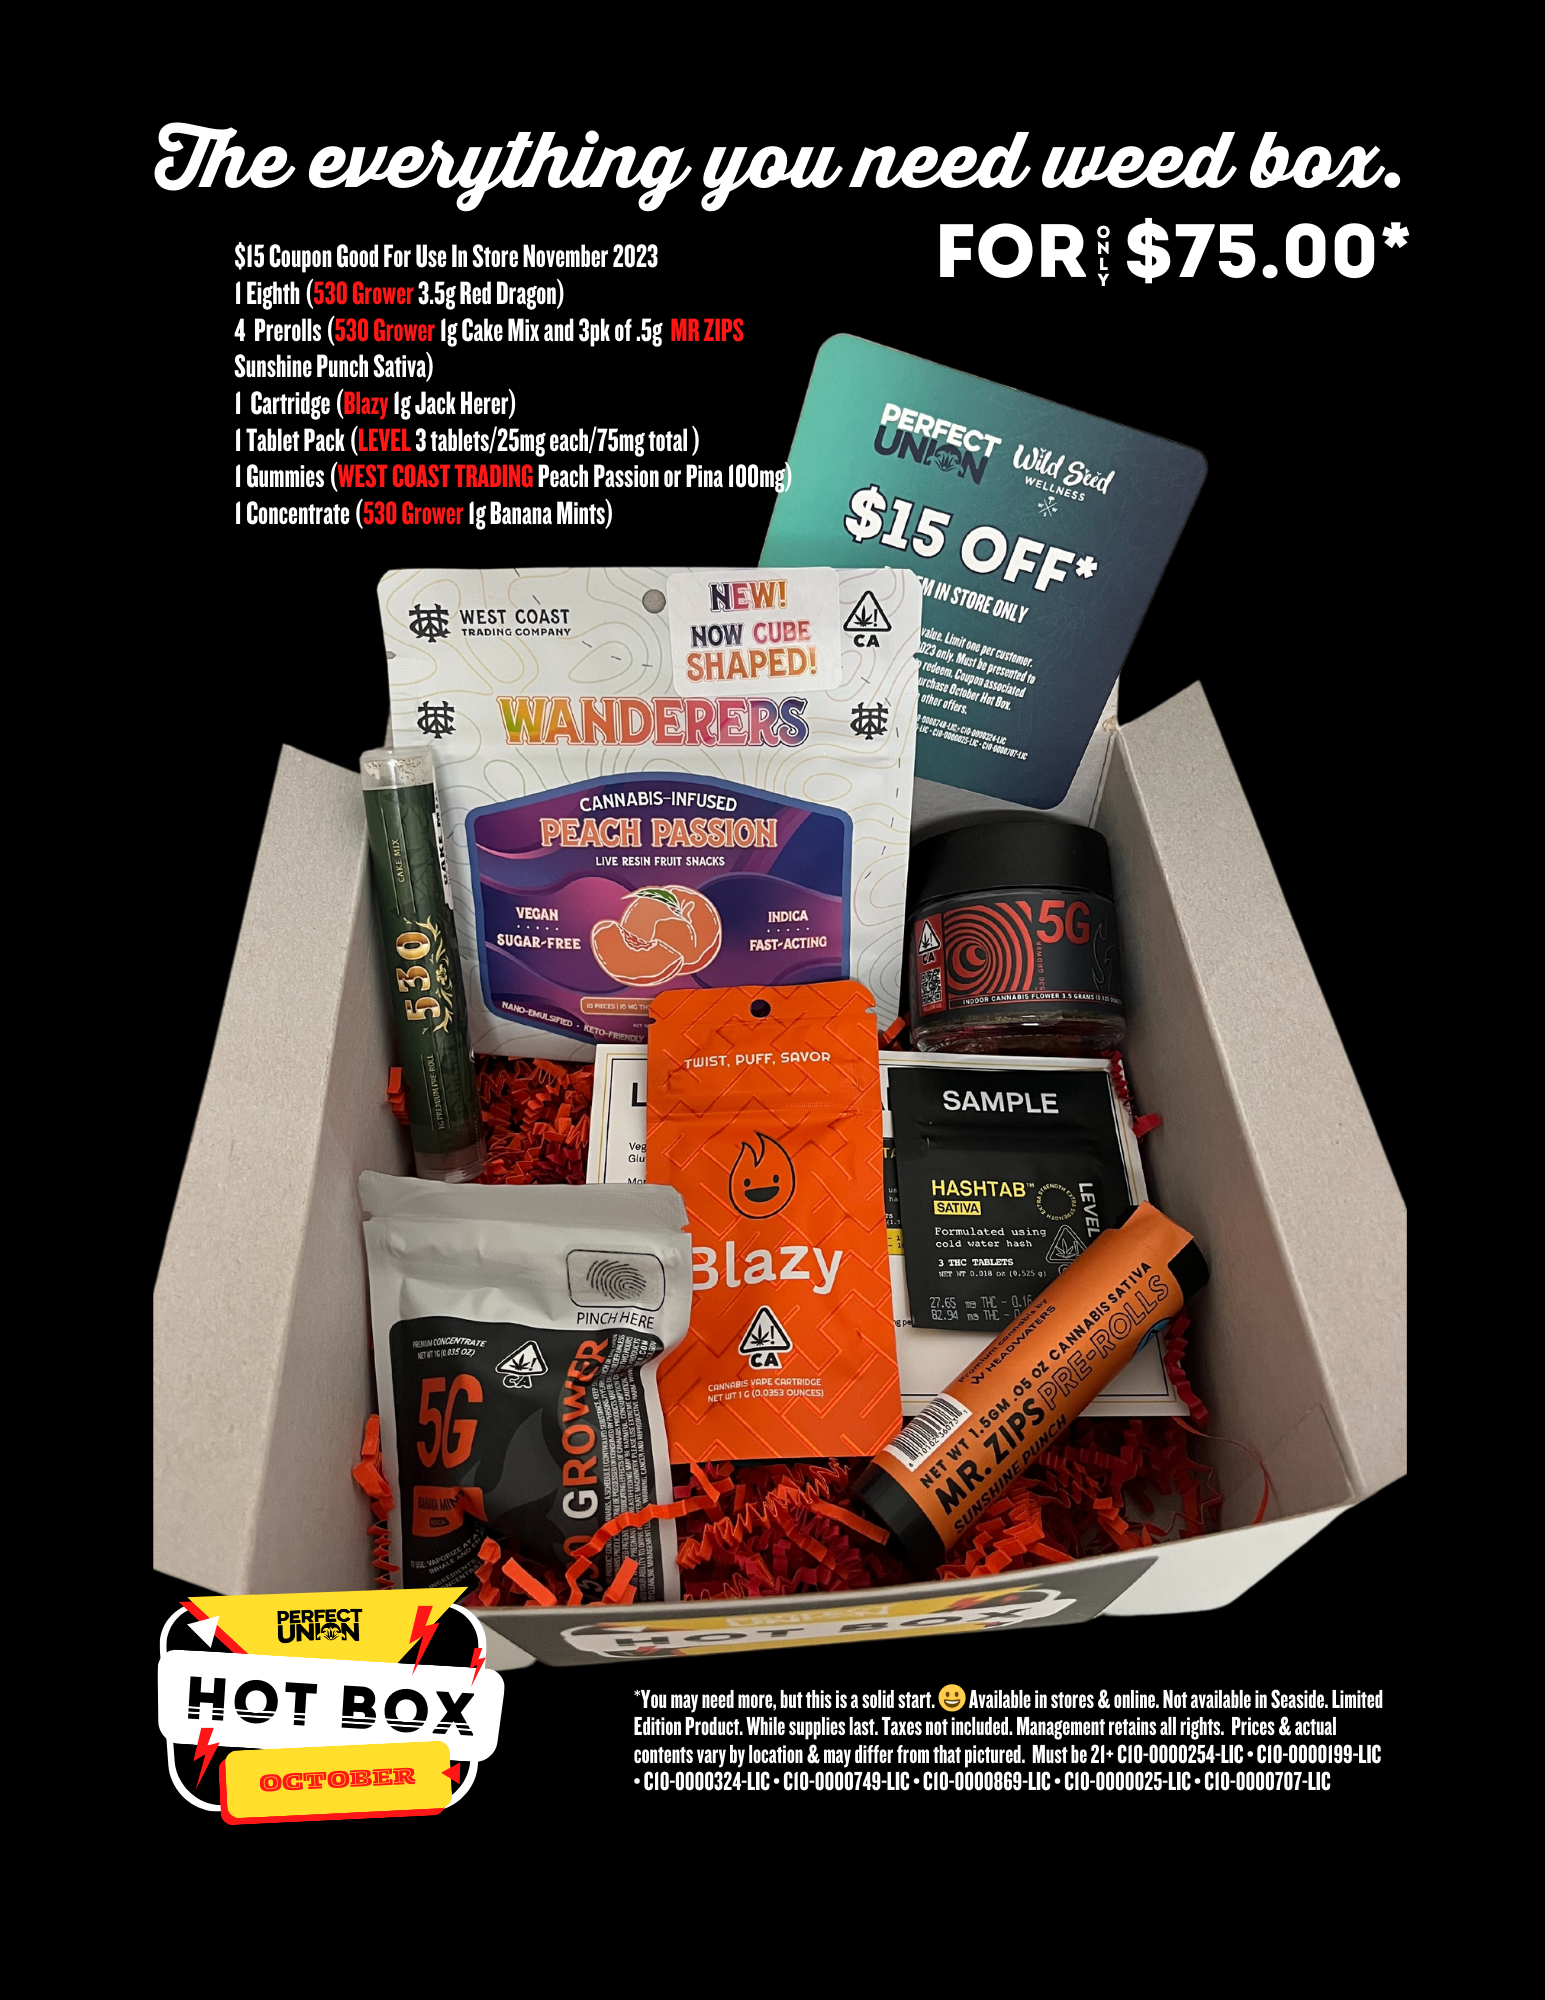 October Hot Box is a Spirited Treat, October 2023 value weed box at Perfect Union on sale October 1, 2023 while supplies last.